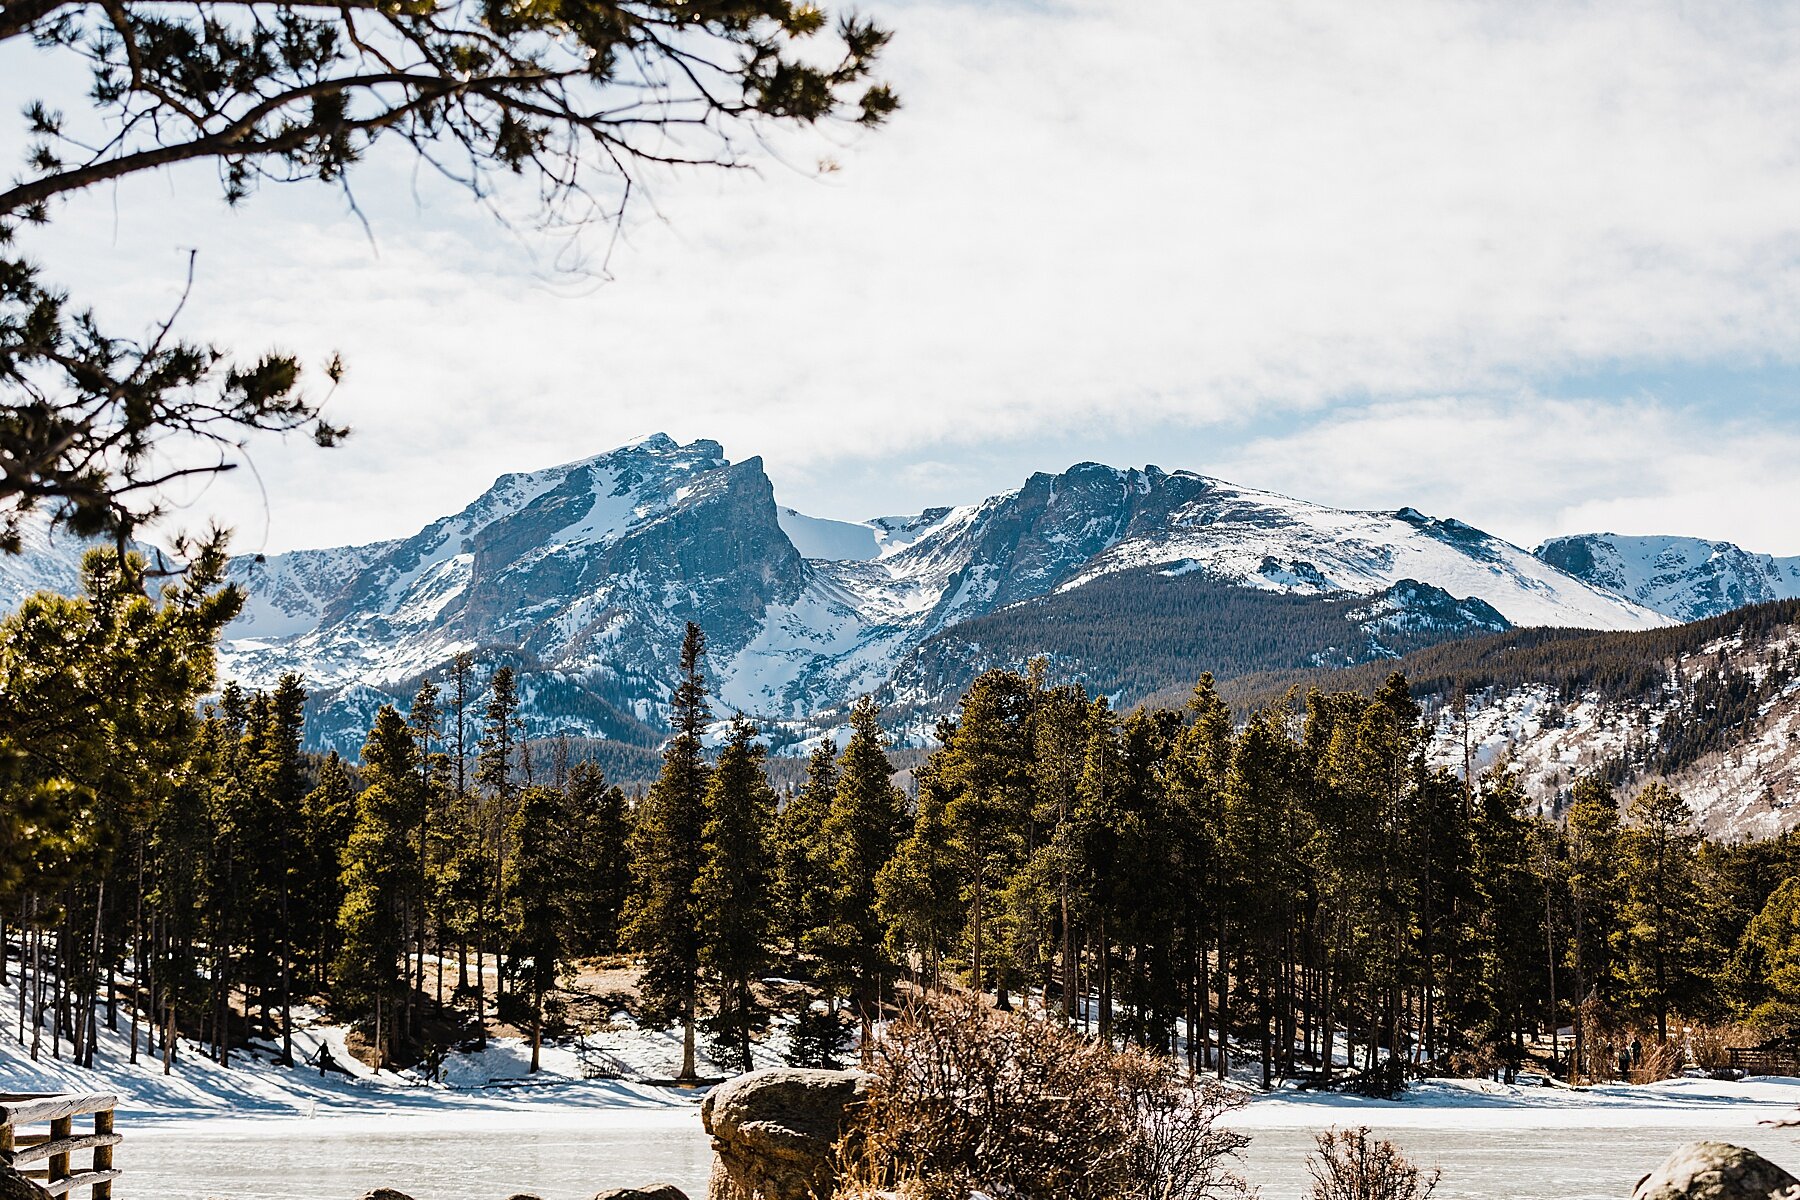 Rocky Mountain National Park Elopement Photographer | Vow of the